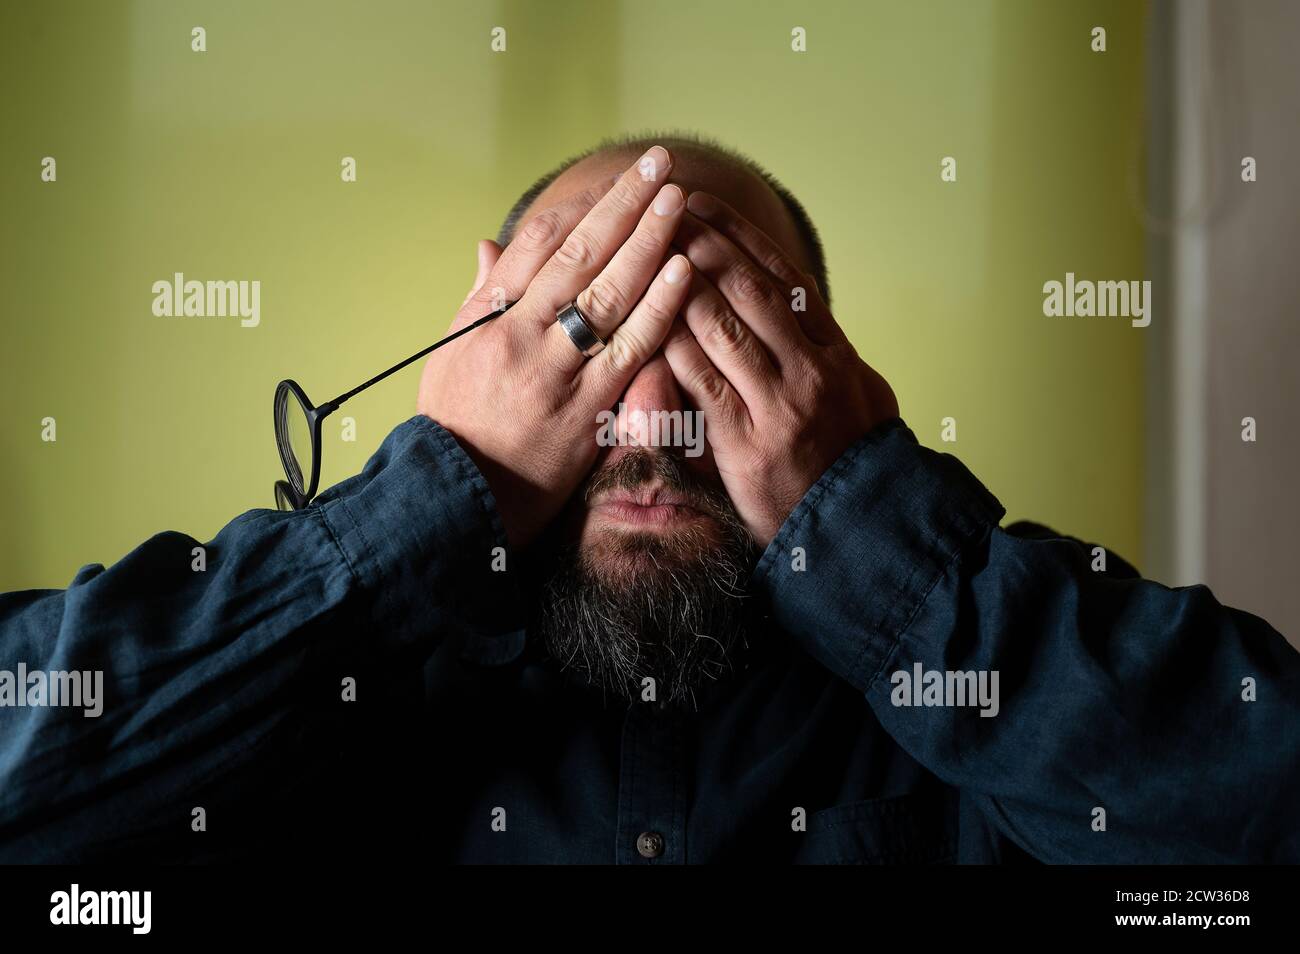 Man hides his face behind his hands so he doesn't have to see Stock Photo